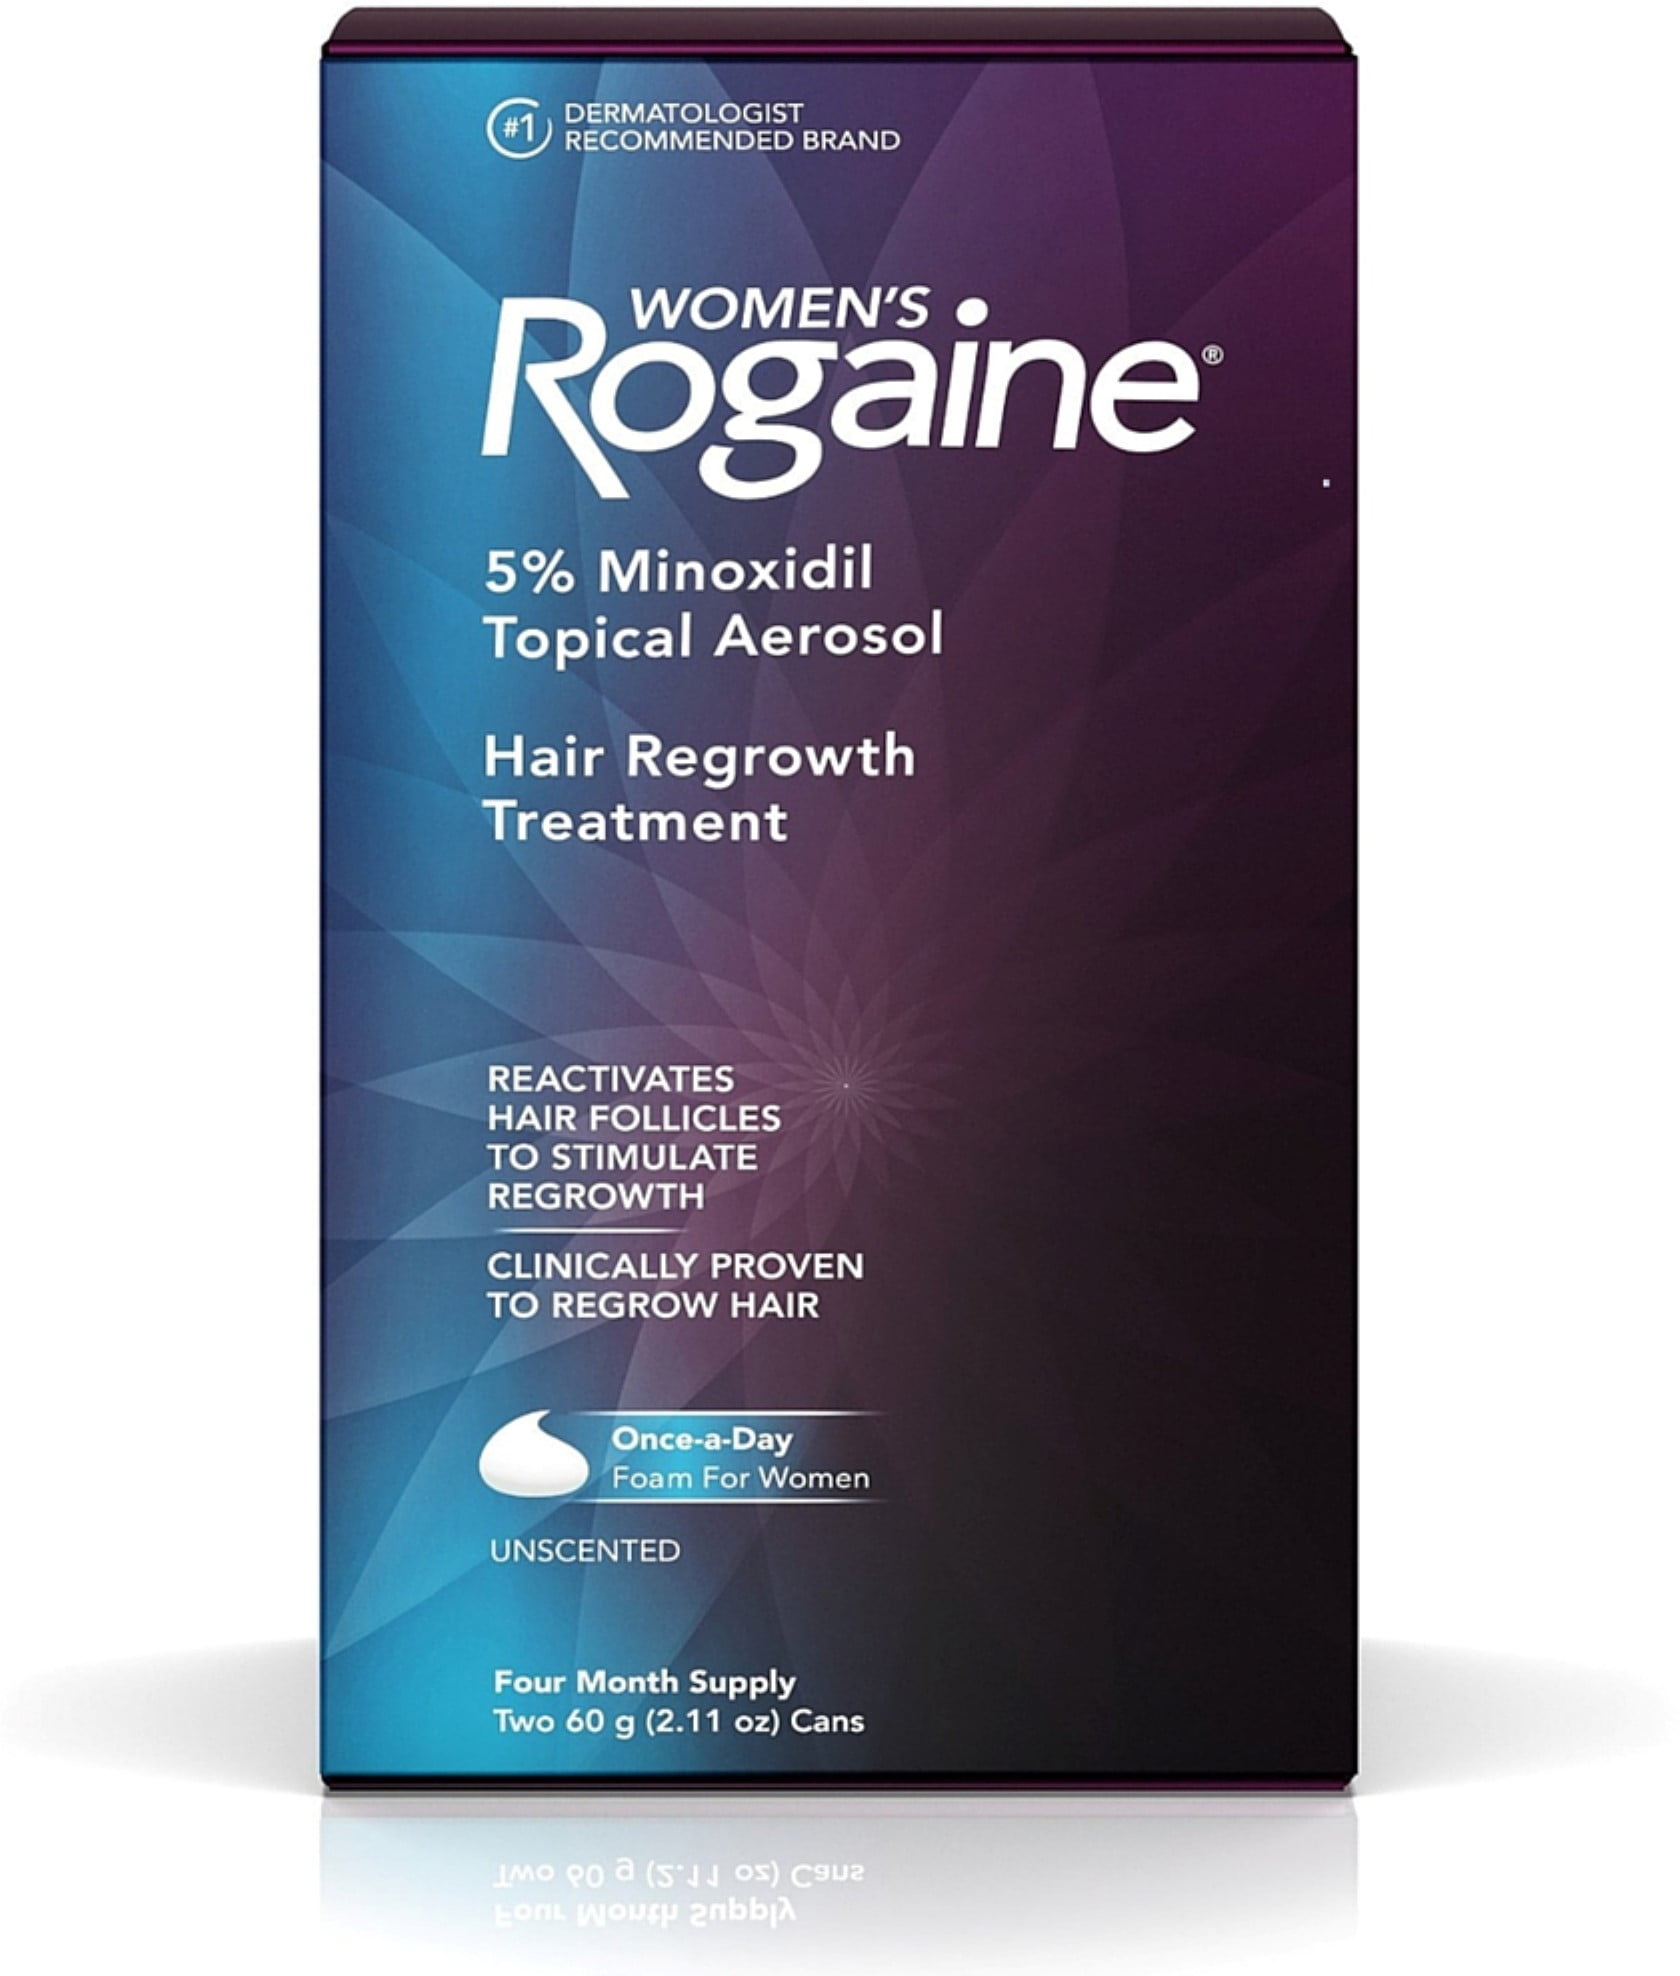 Rogaine Women's Hair Regrowth Treatment, 4 Month Supply,  oz cans, 2 ea  (Pack of 4) 